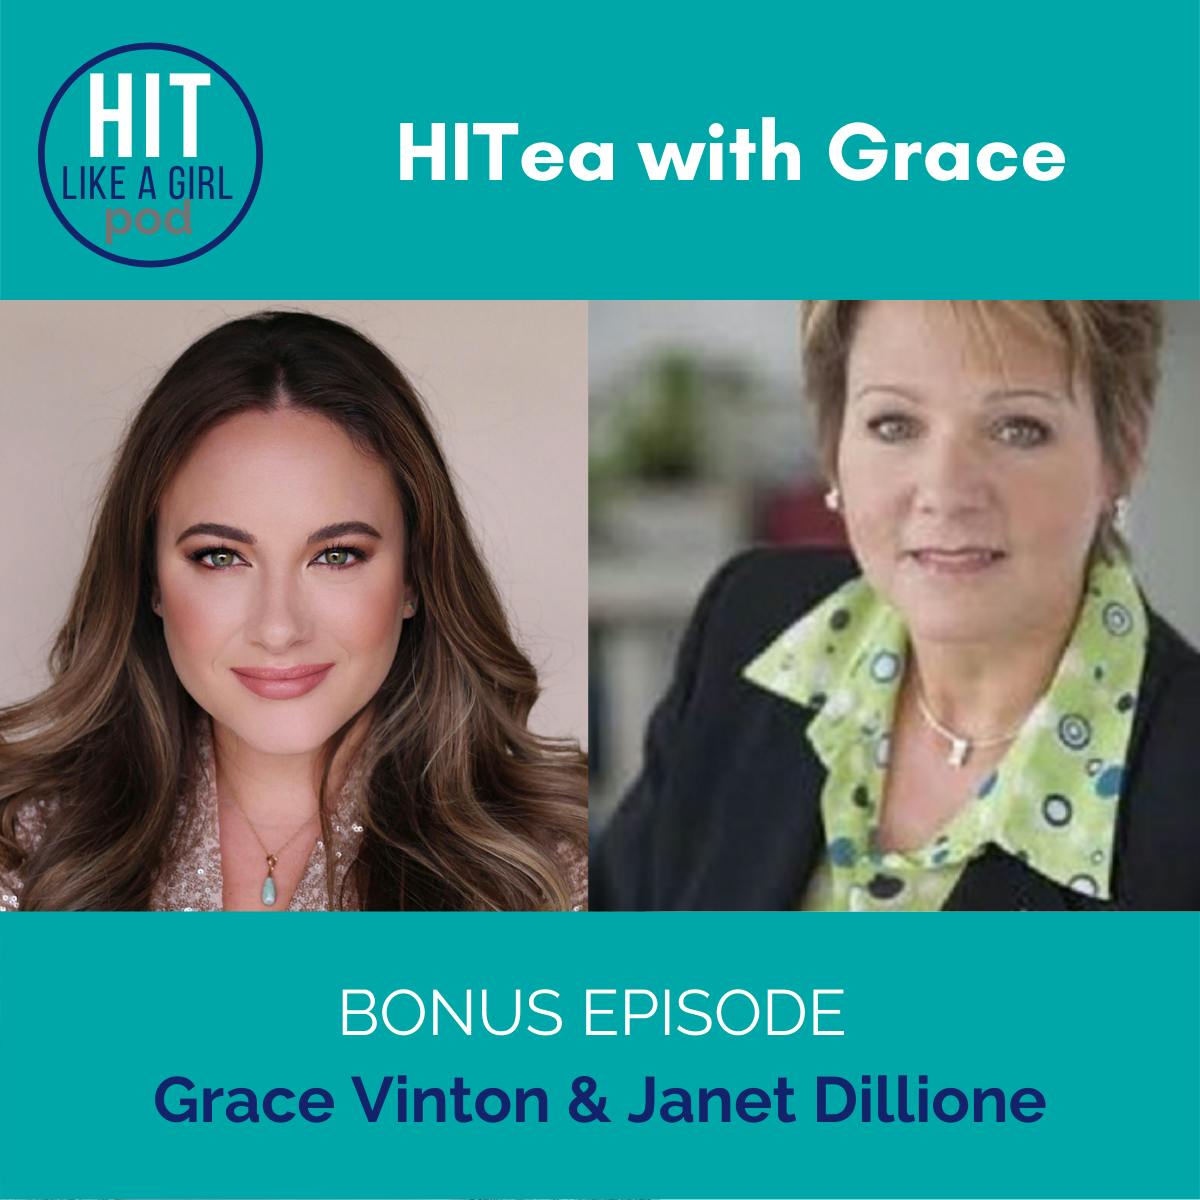 Grace Vinton & Janet Dillione Explore How to Support Vulnerable Populations at Home